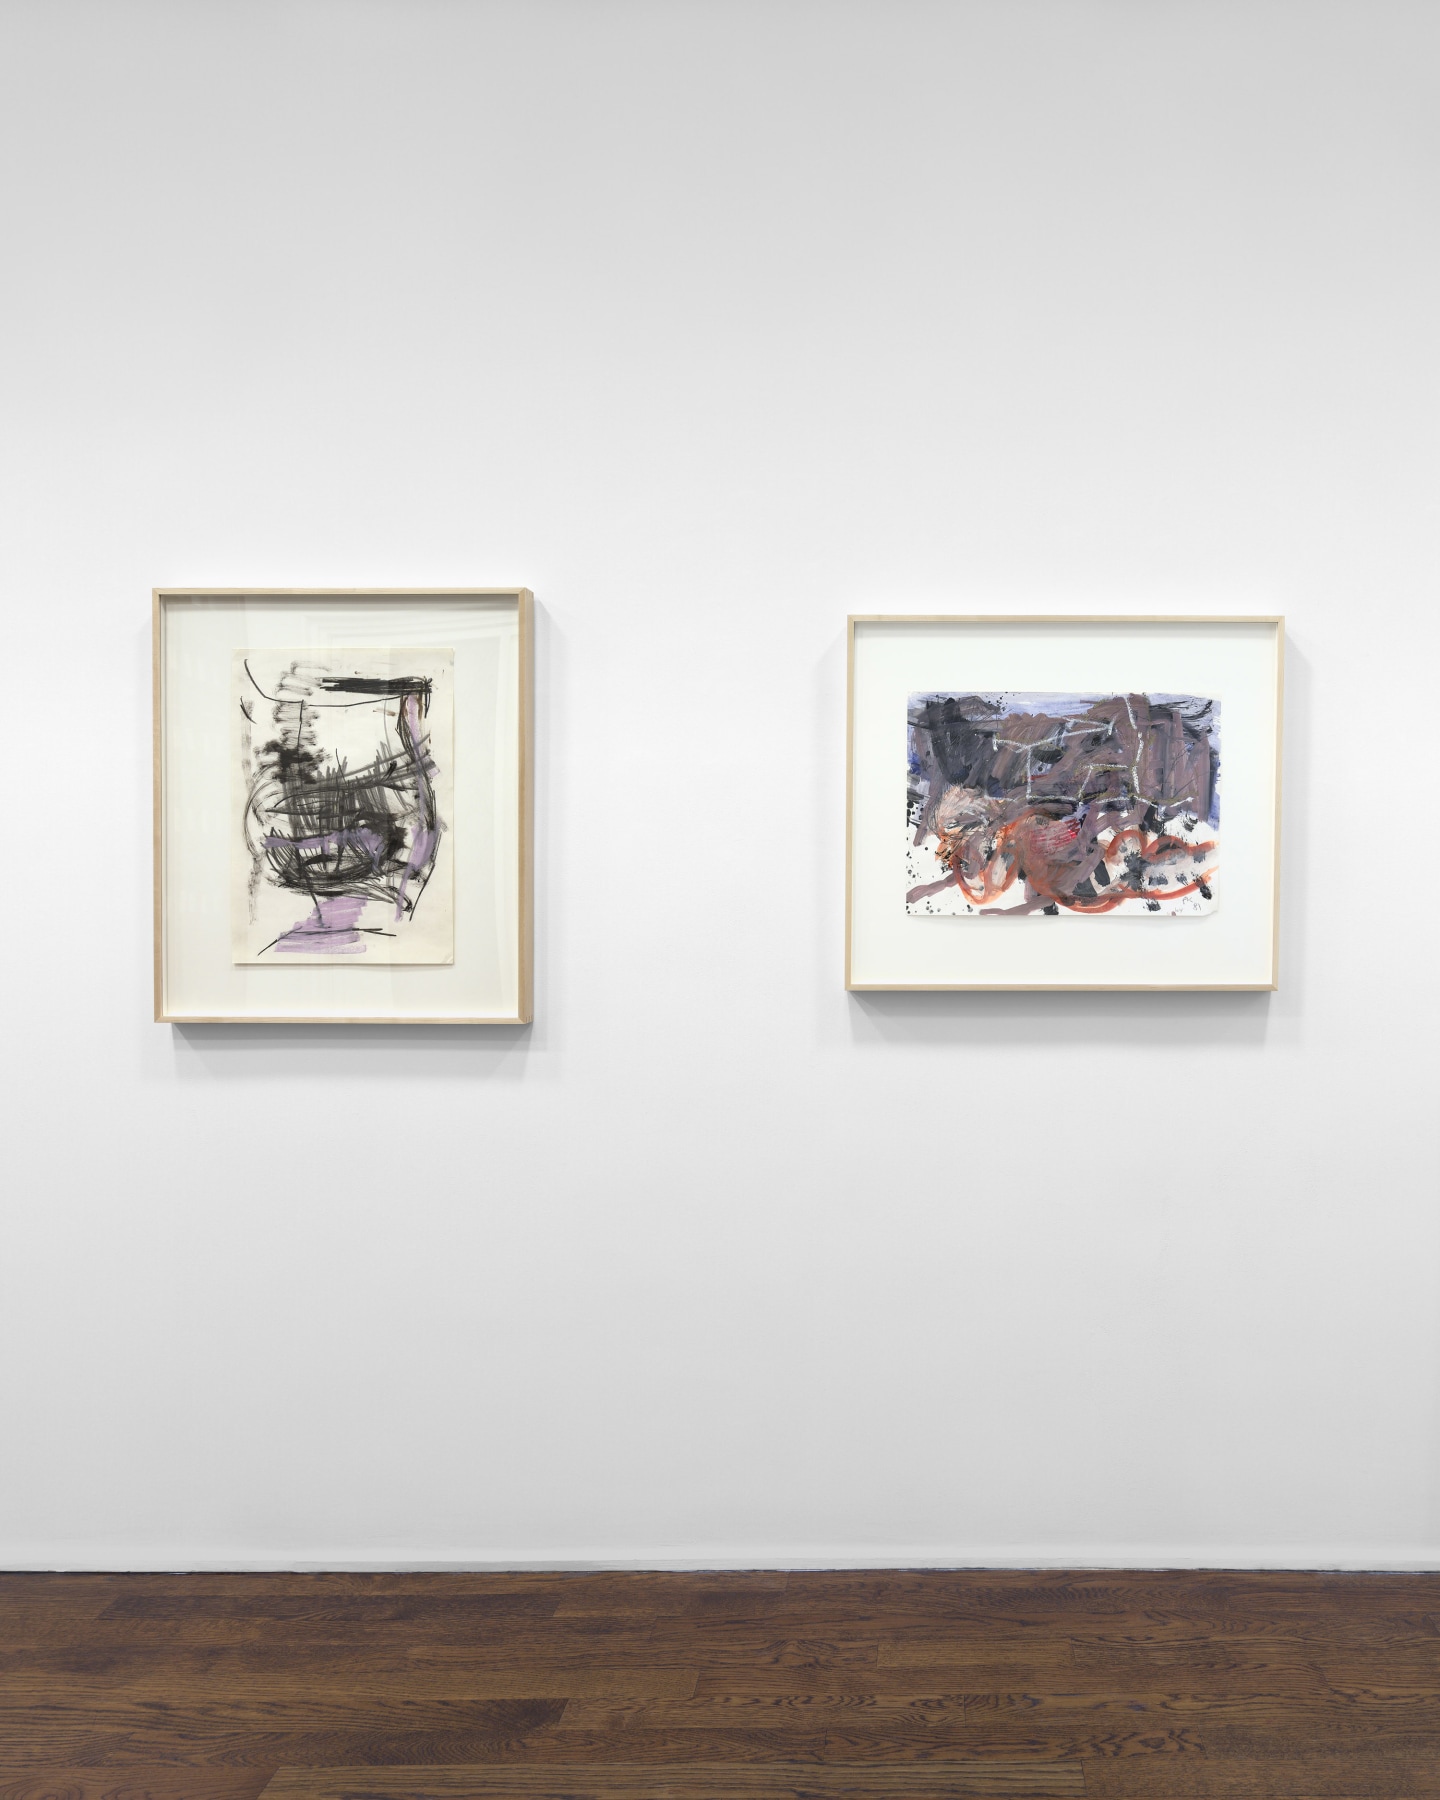 PER KIRKEBY Works on Paper, Works in Brick 20 November 2019 through 25 January 2020 UPPER EAST SIDE, NEW YORK, Installation View 11